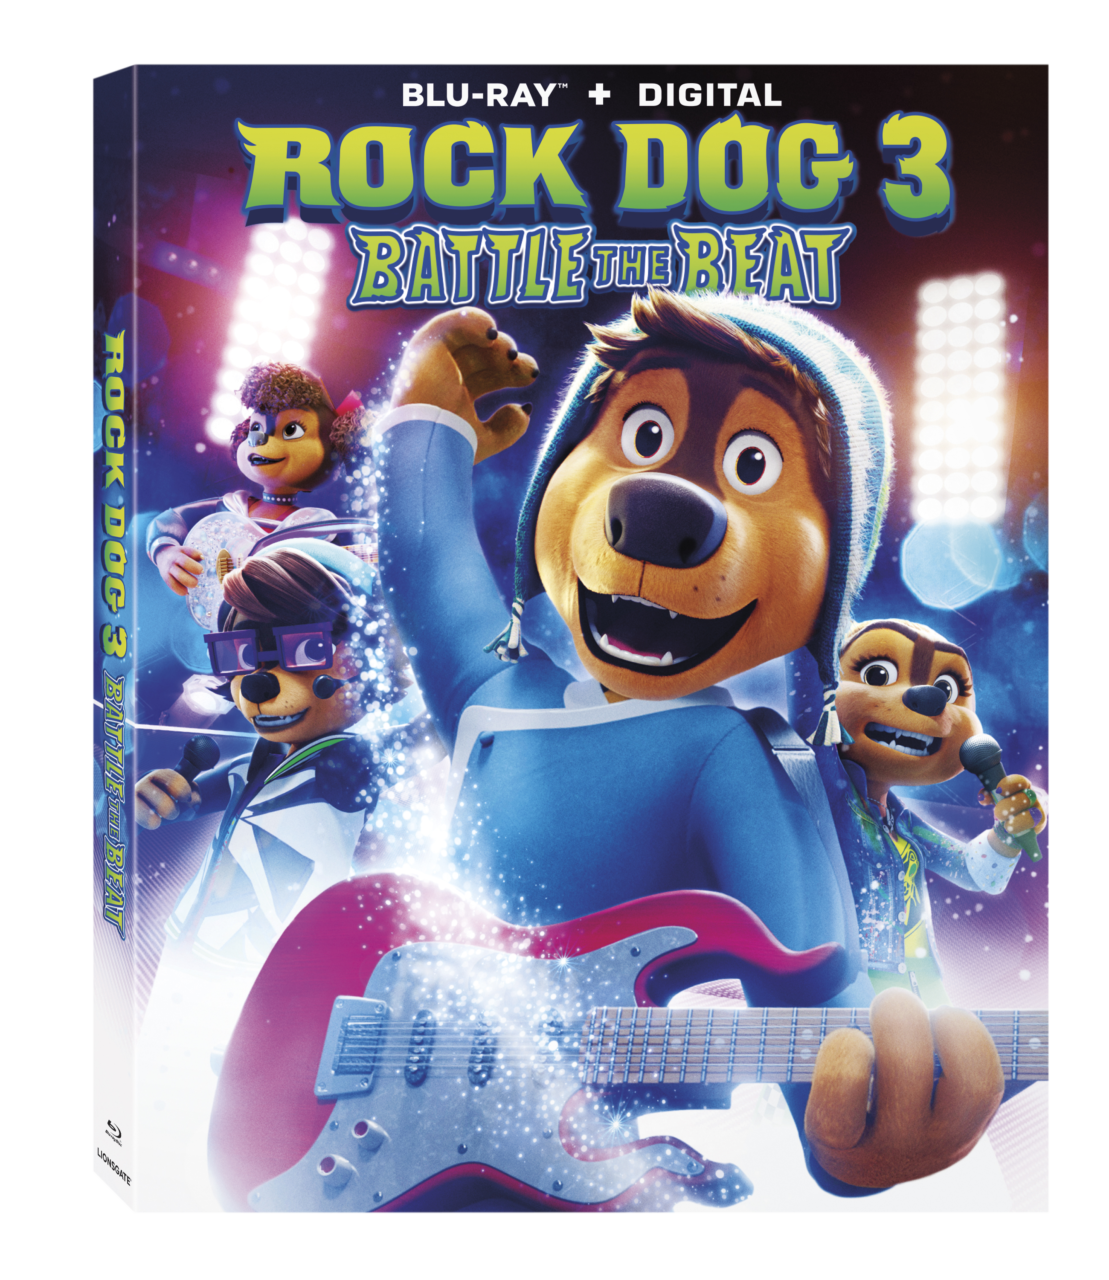 Rock Dog 3: Battle The Beat Blu-Ray cover (Lionsgate)